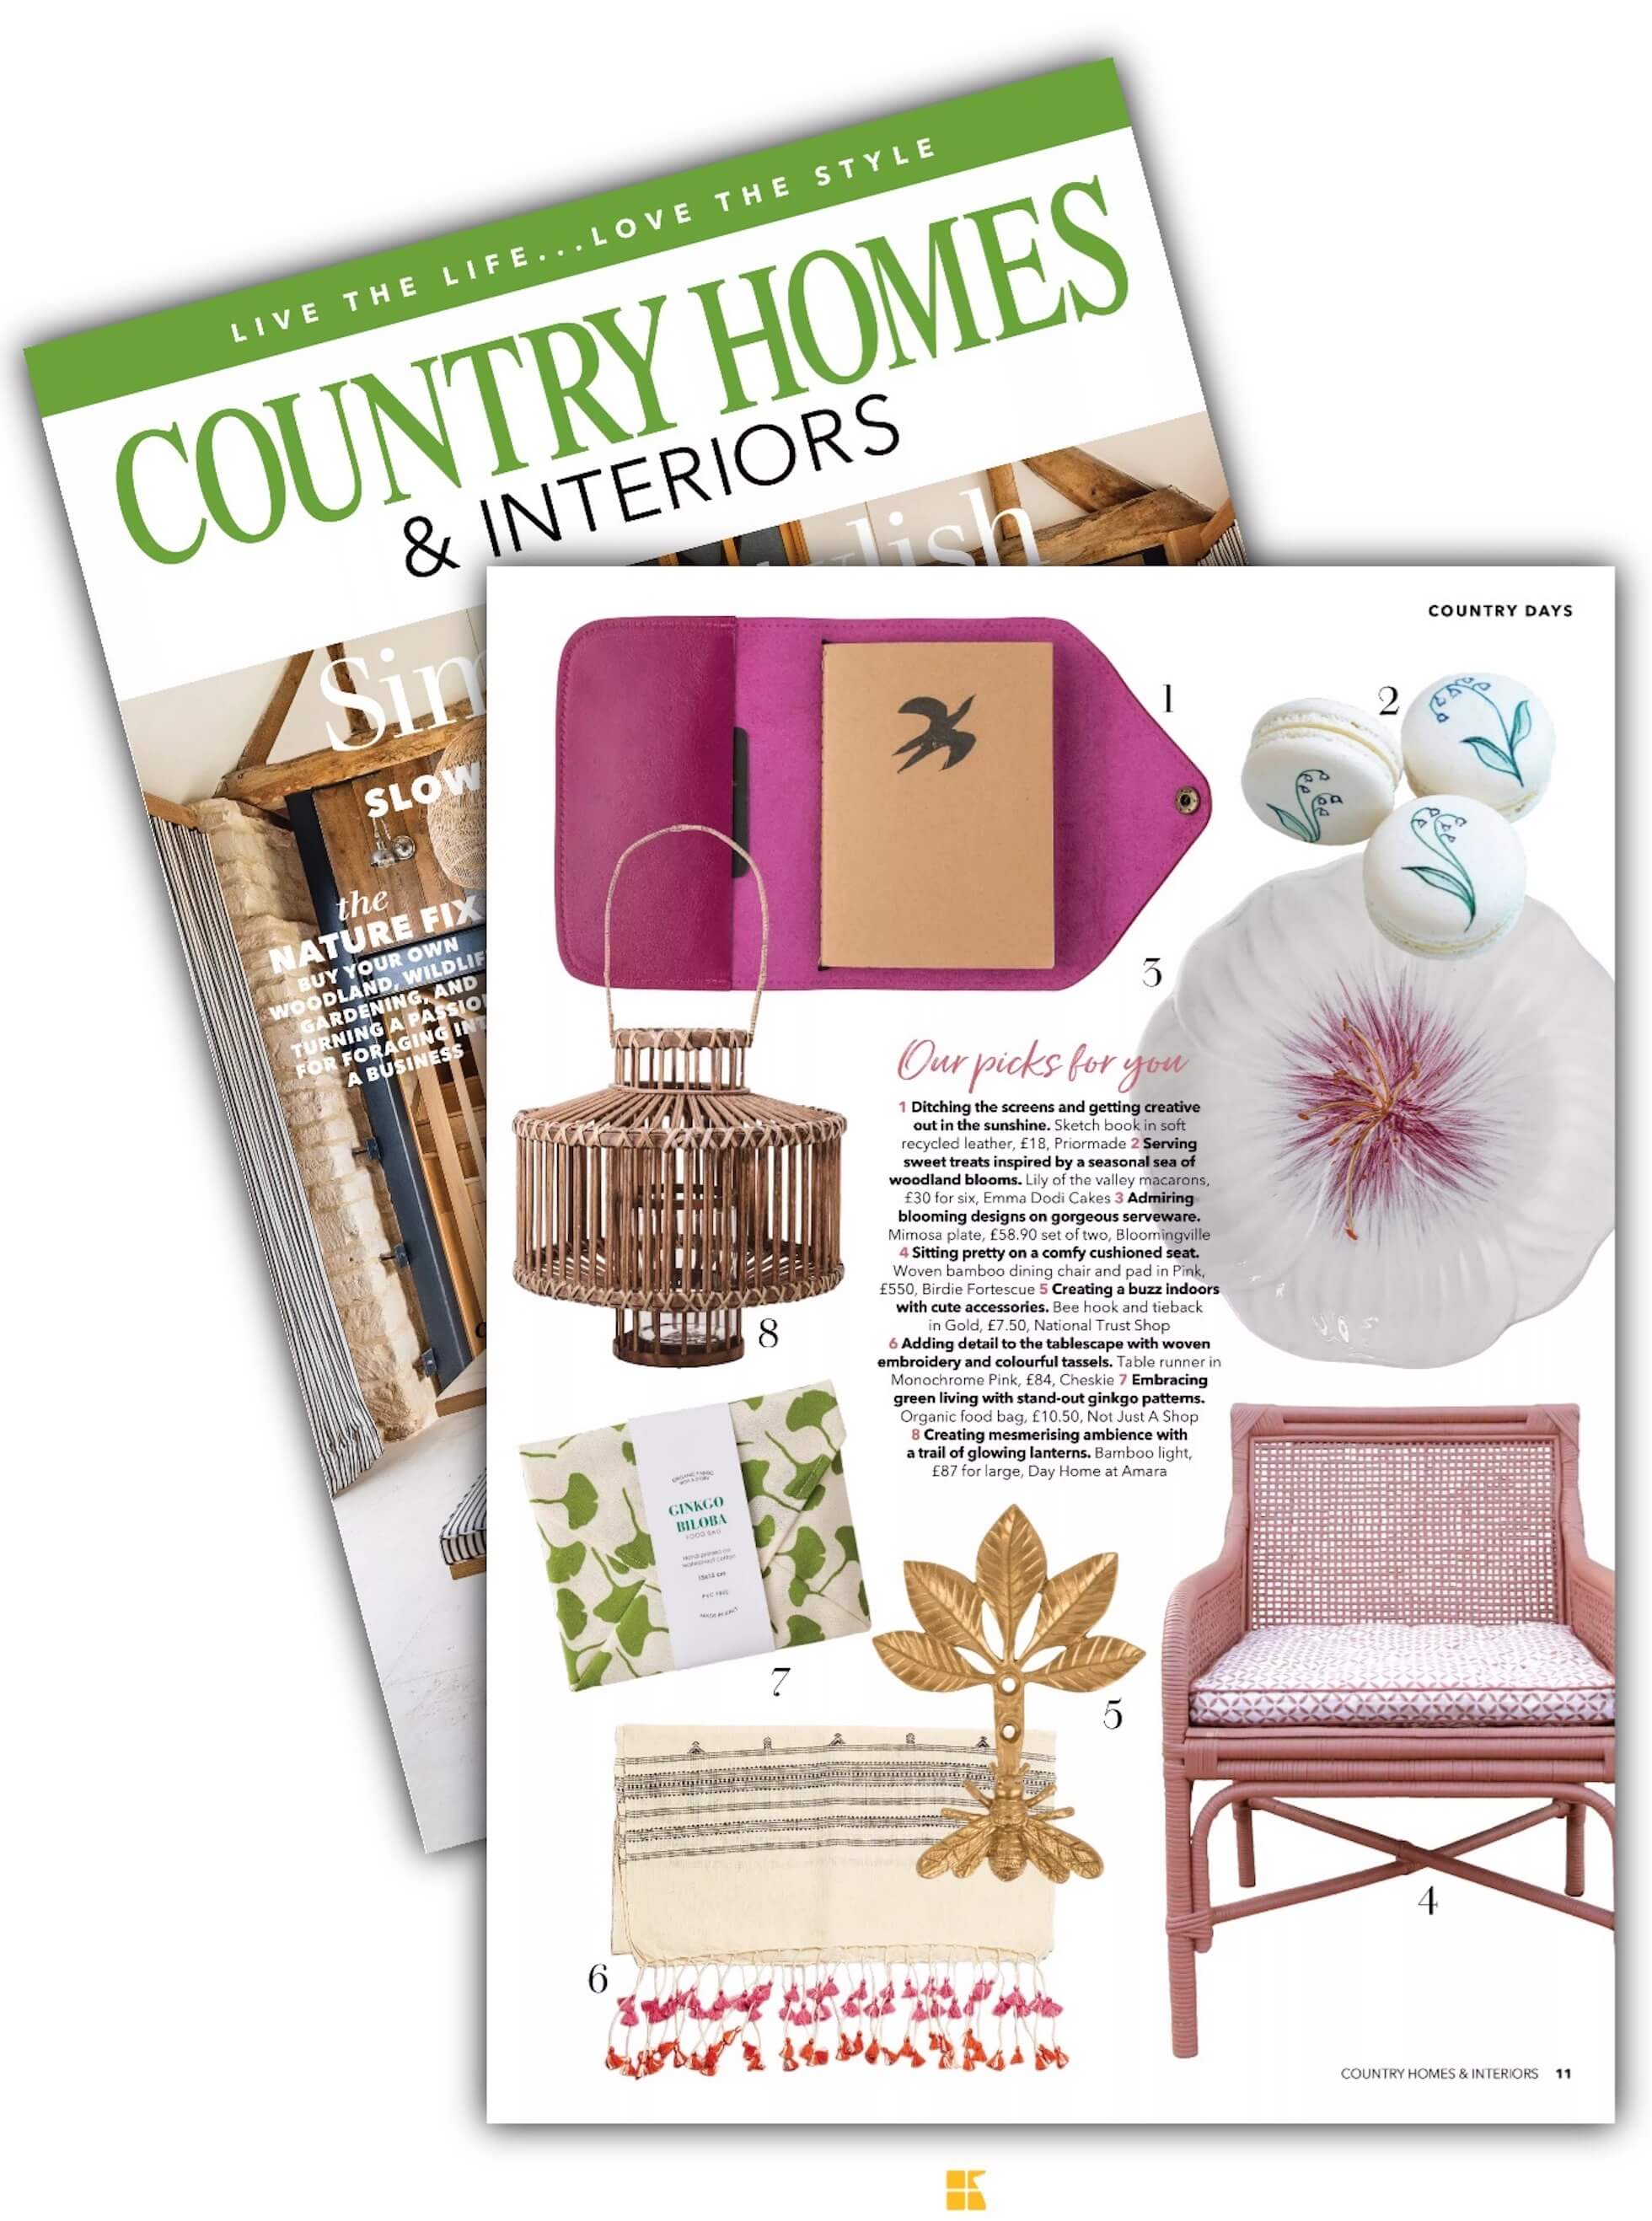 Prior-Shop-Country-Homes-and-Interiors-Zoe-Dunn-Handmade-Sketchbook